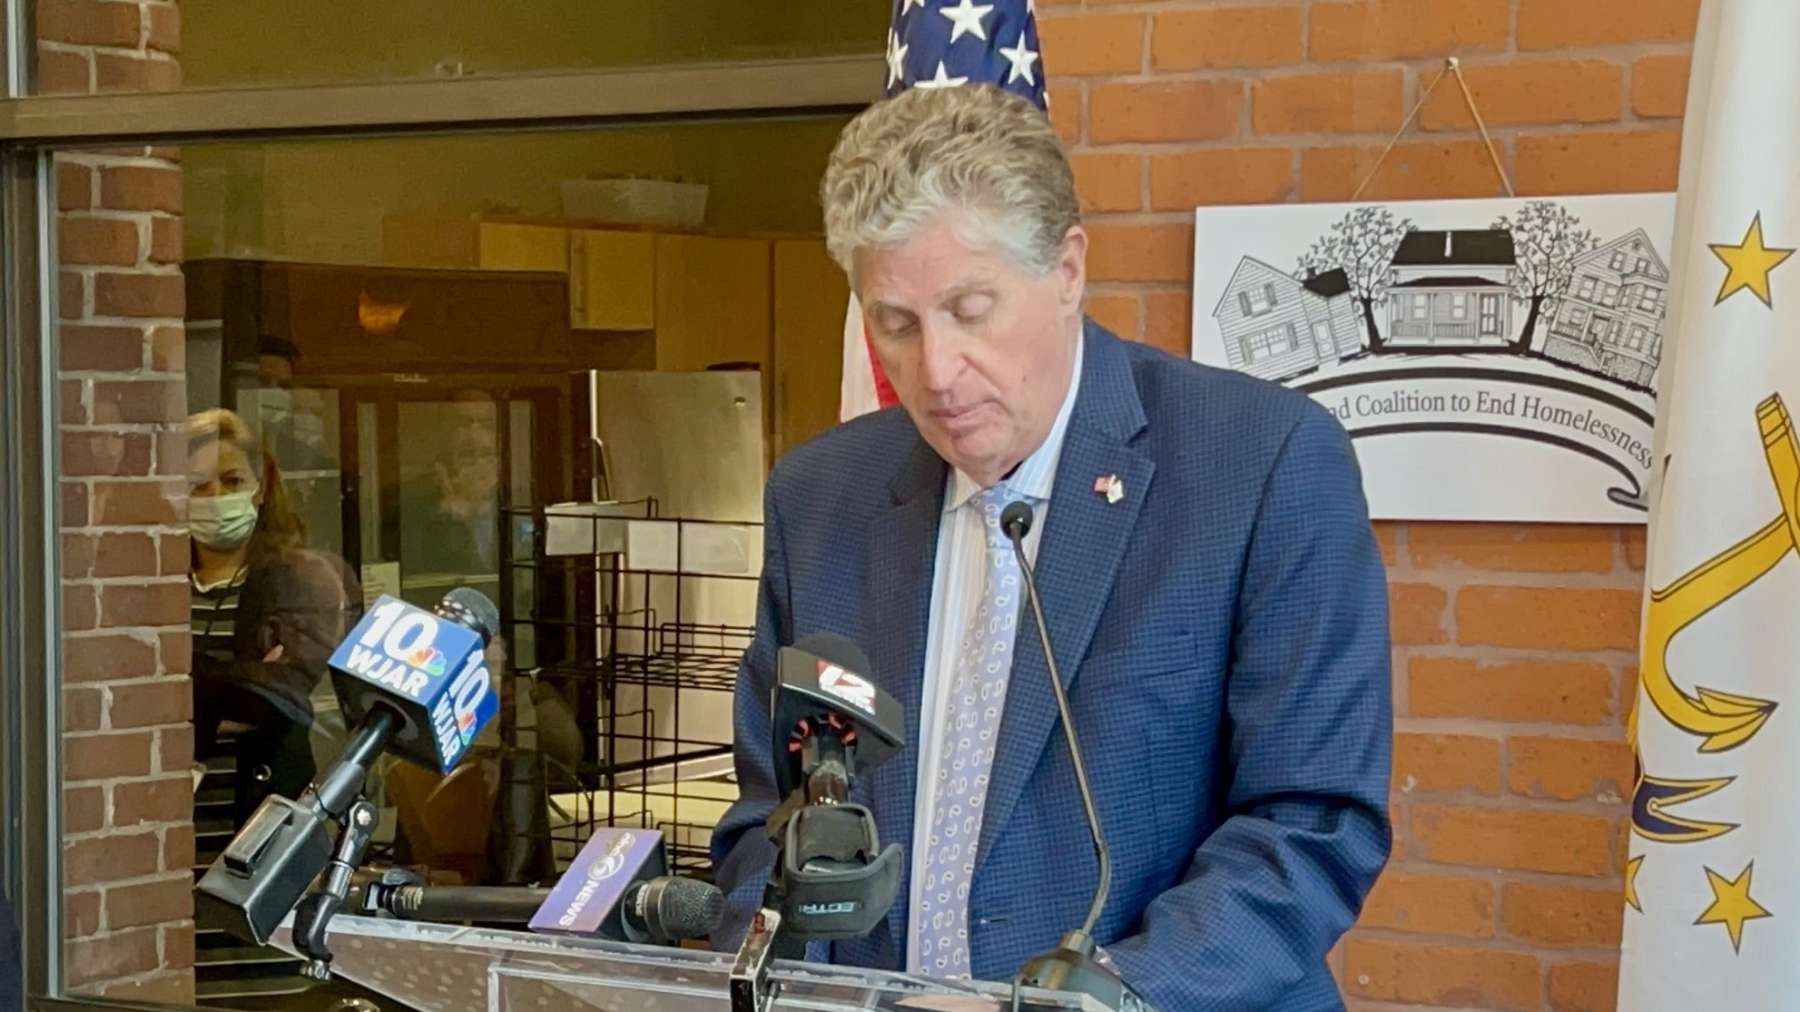 Governor McKee takes helter-skelter approach to combatting homelessness